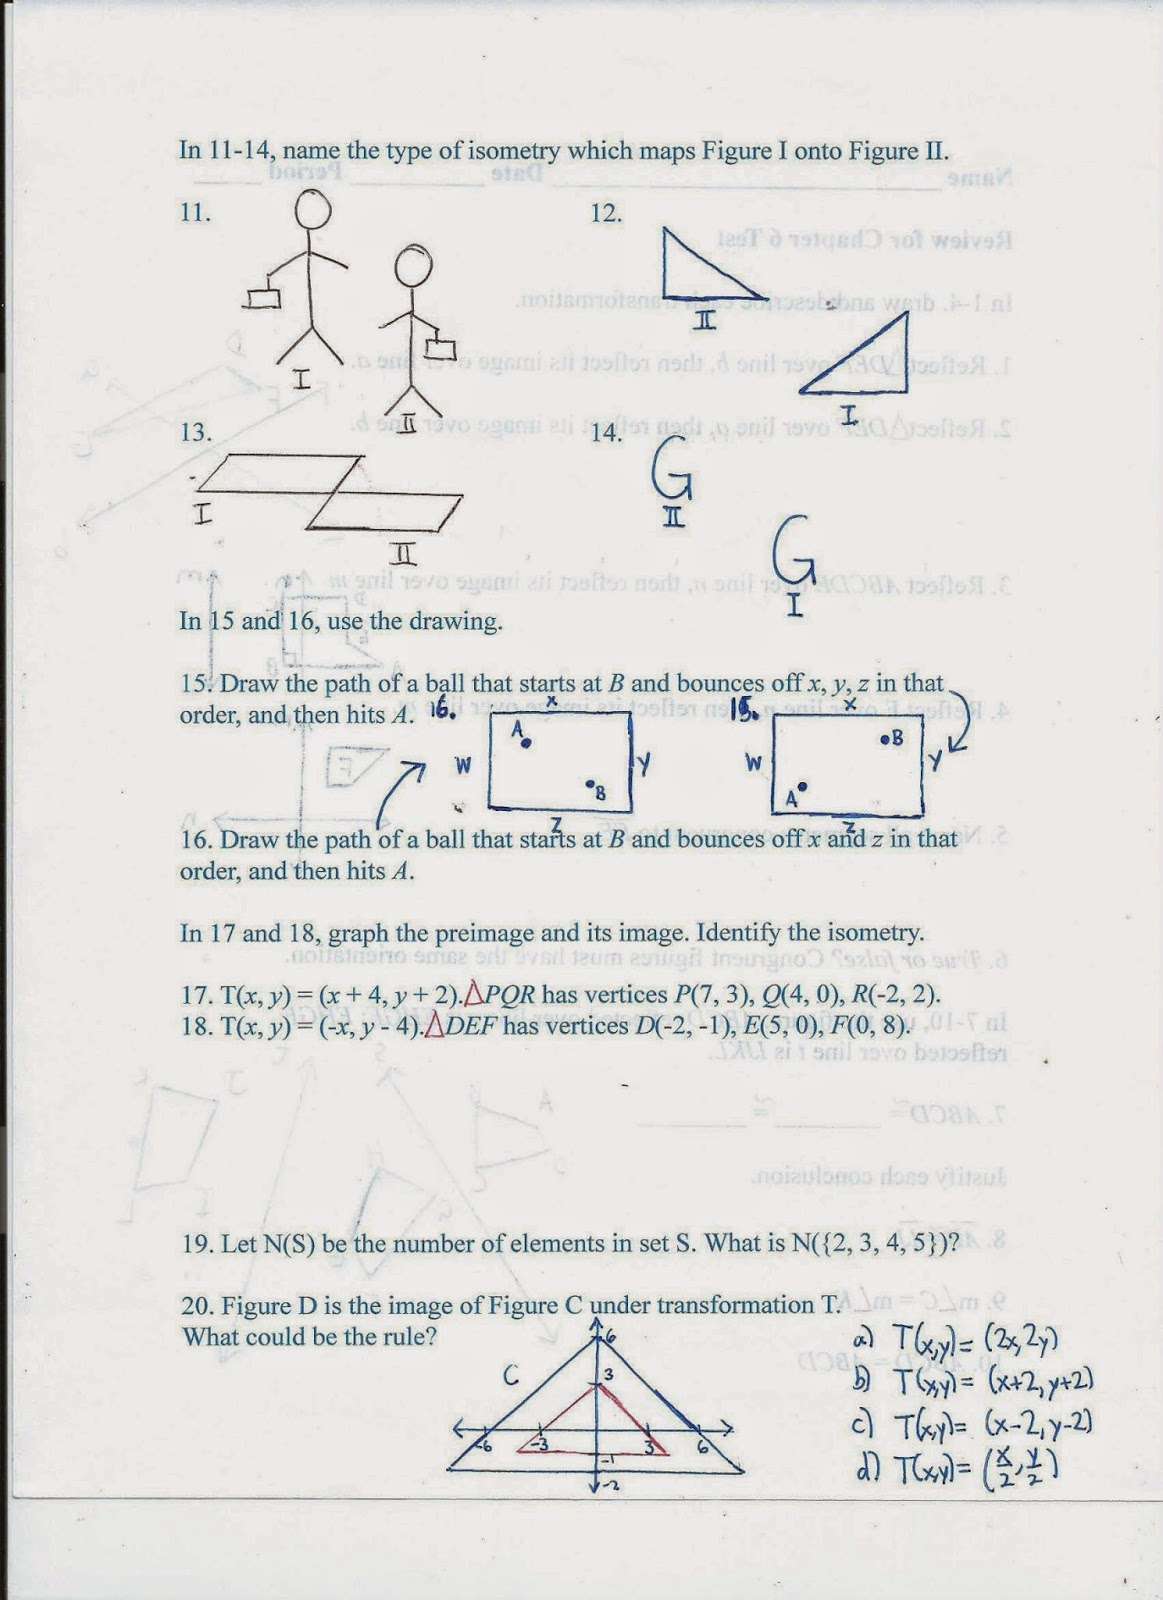 Geometry, Common Core Style: Review for Chapter 6 Test (Day 67)